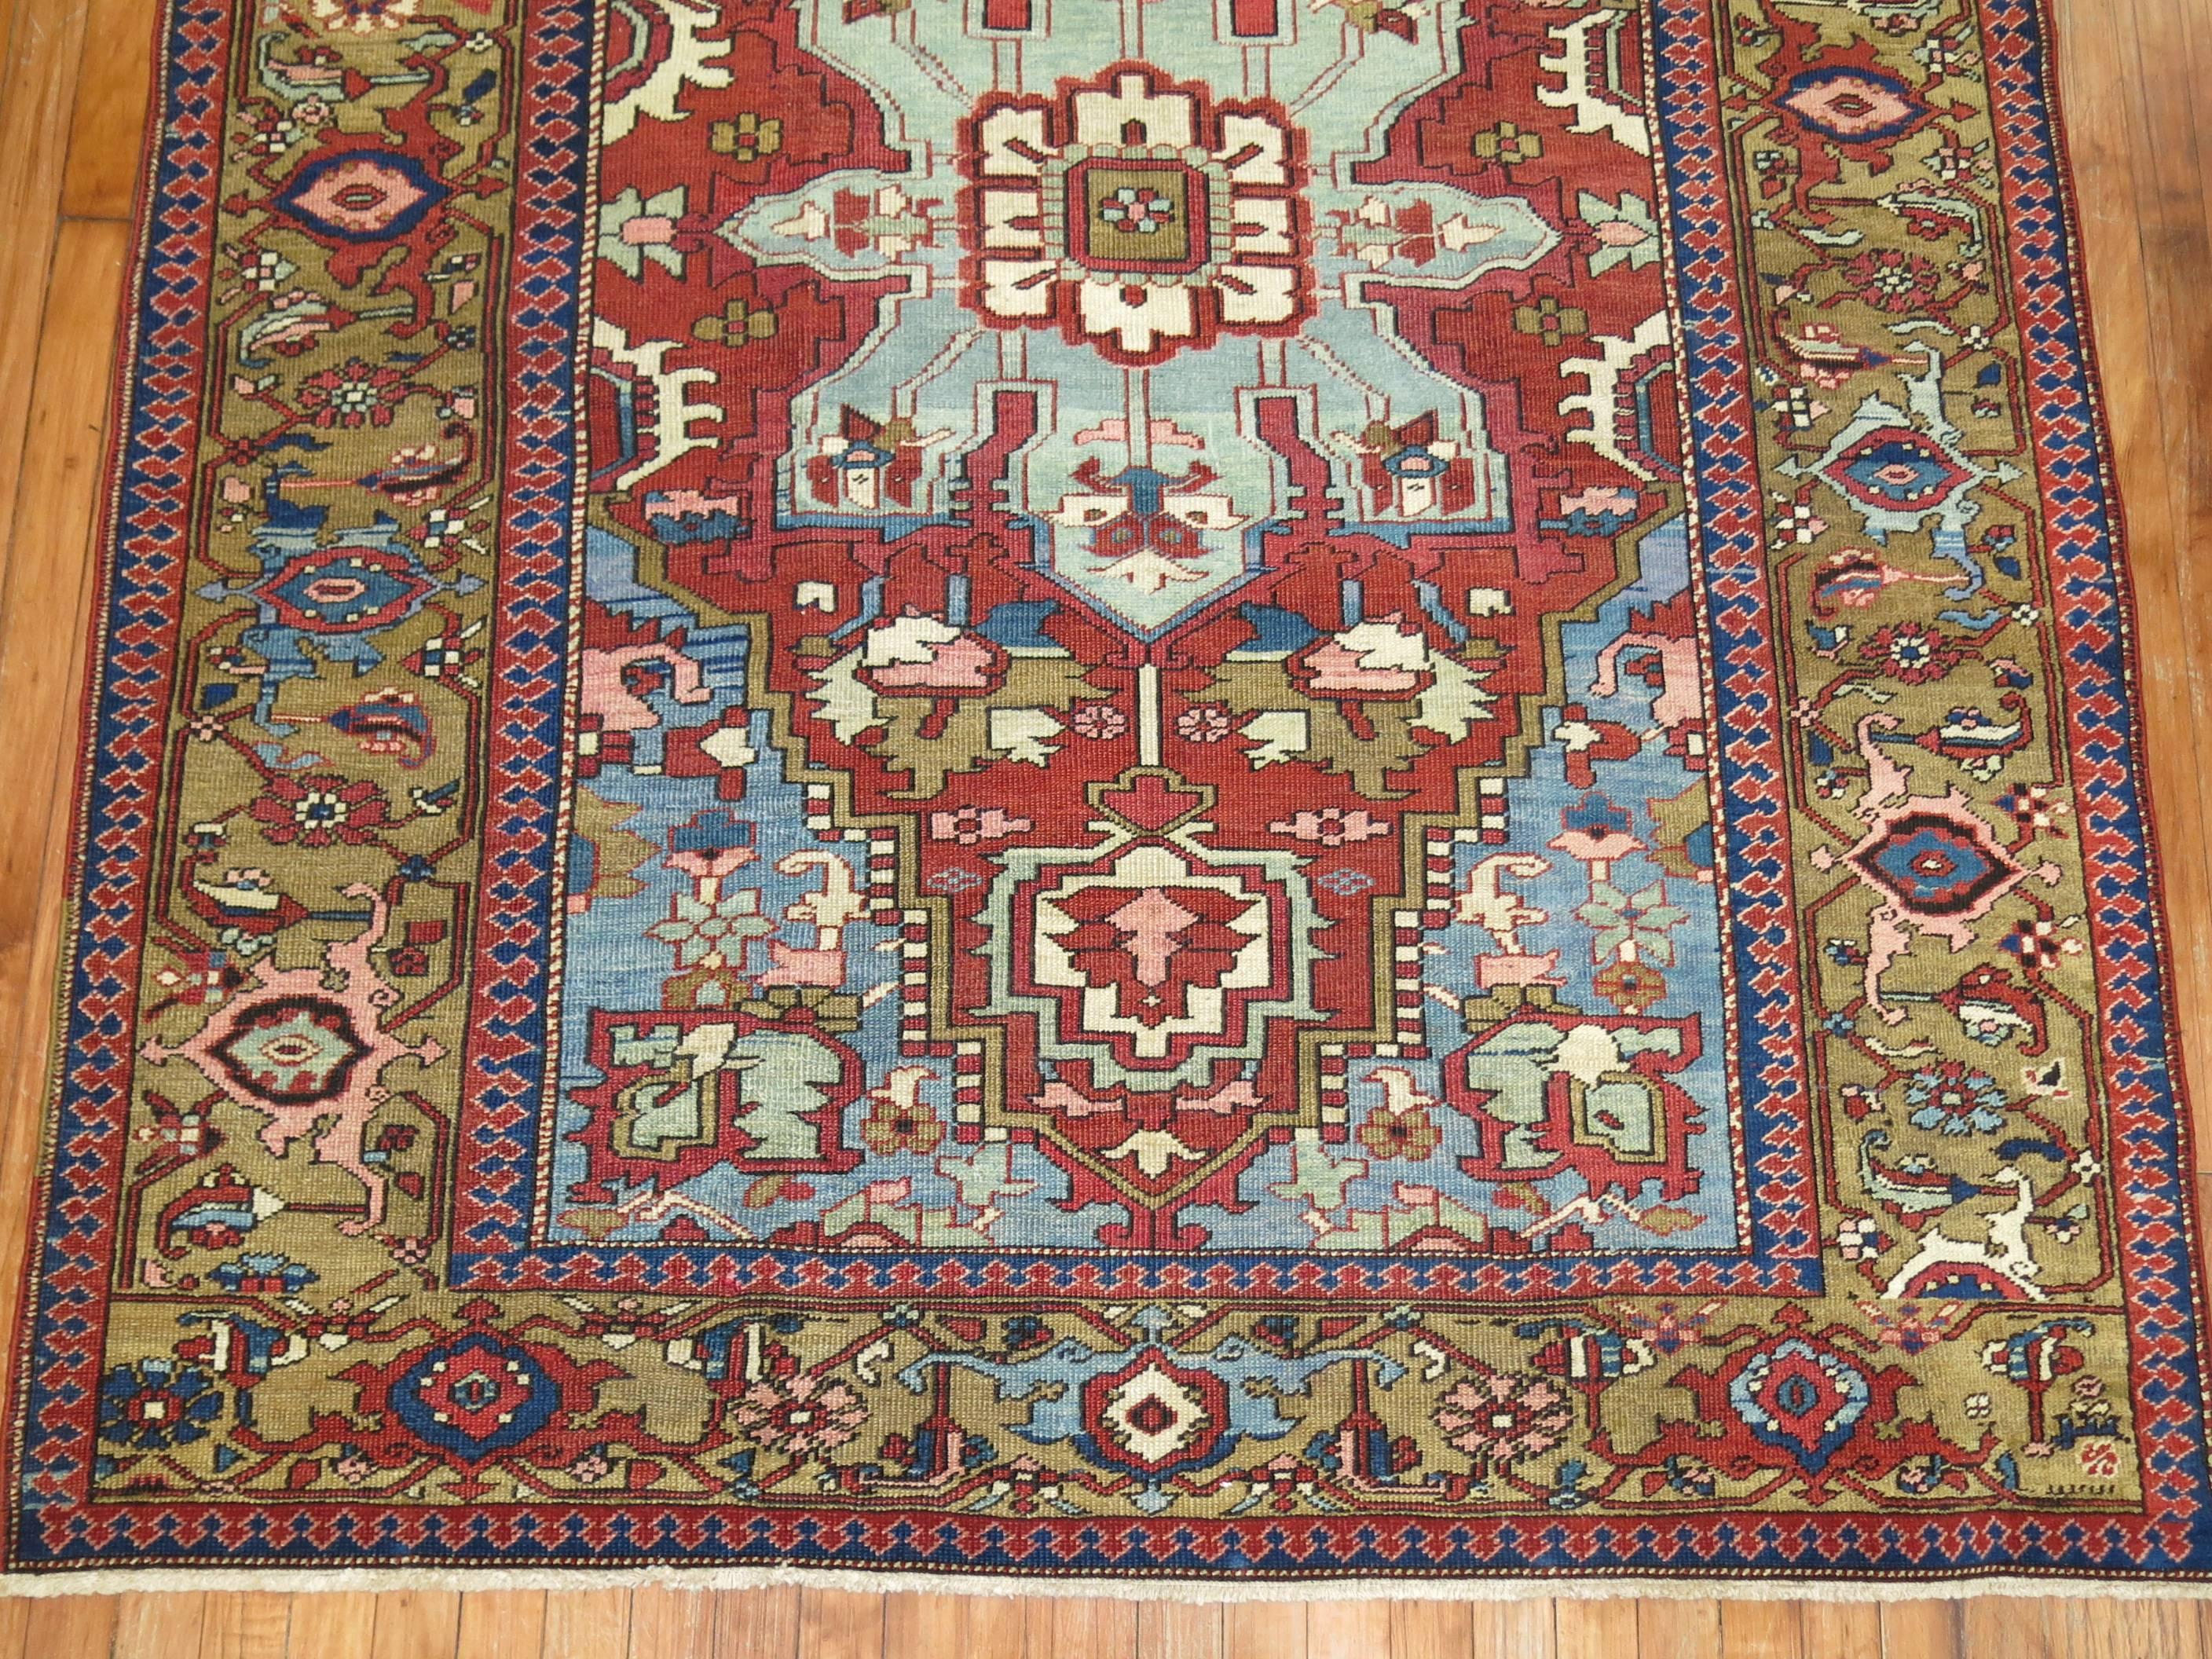 A rare size early 20th century Persian Serapi rug. Finely woven with Classic medallion and border. Dark rusty brown inner ground with a brown green caramel border and dominant accents in soft and denim blue. This quality on this piece is